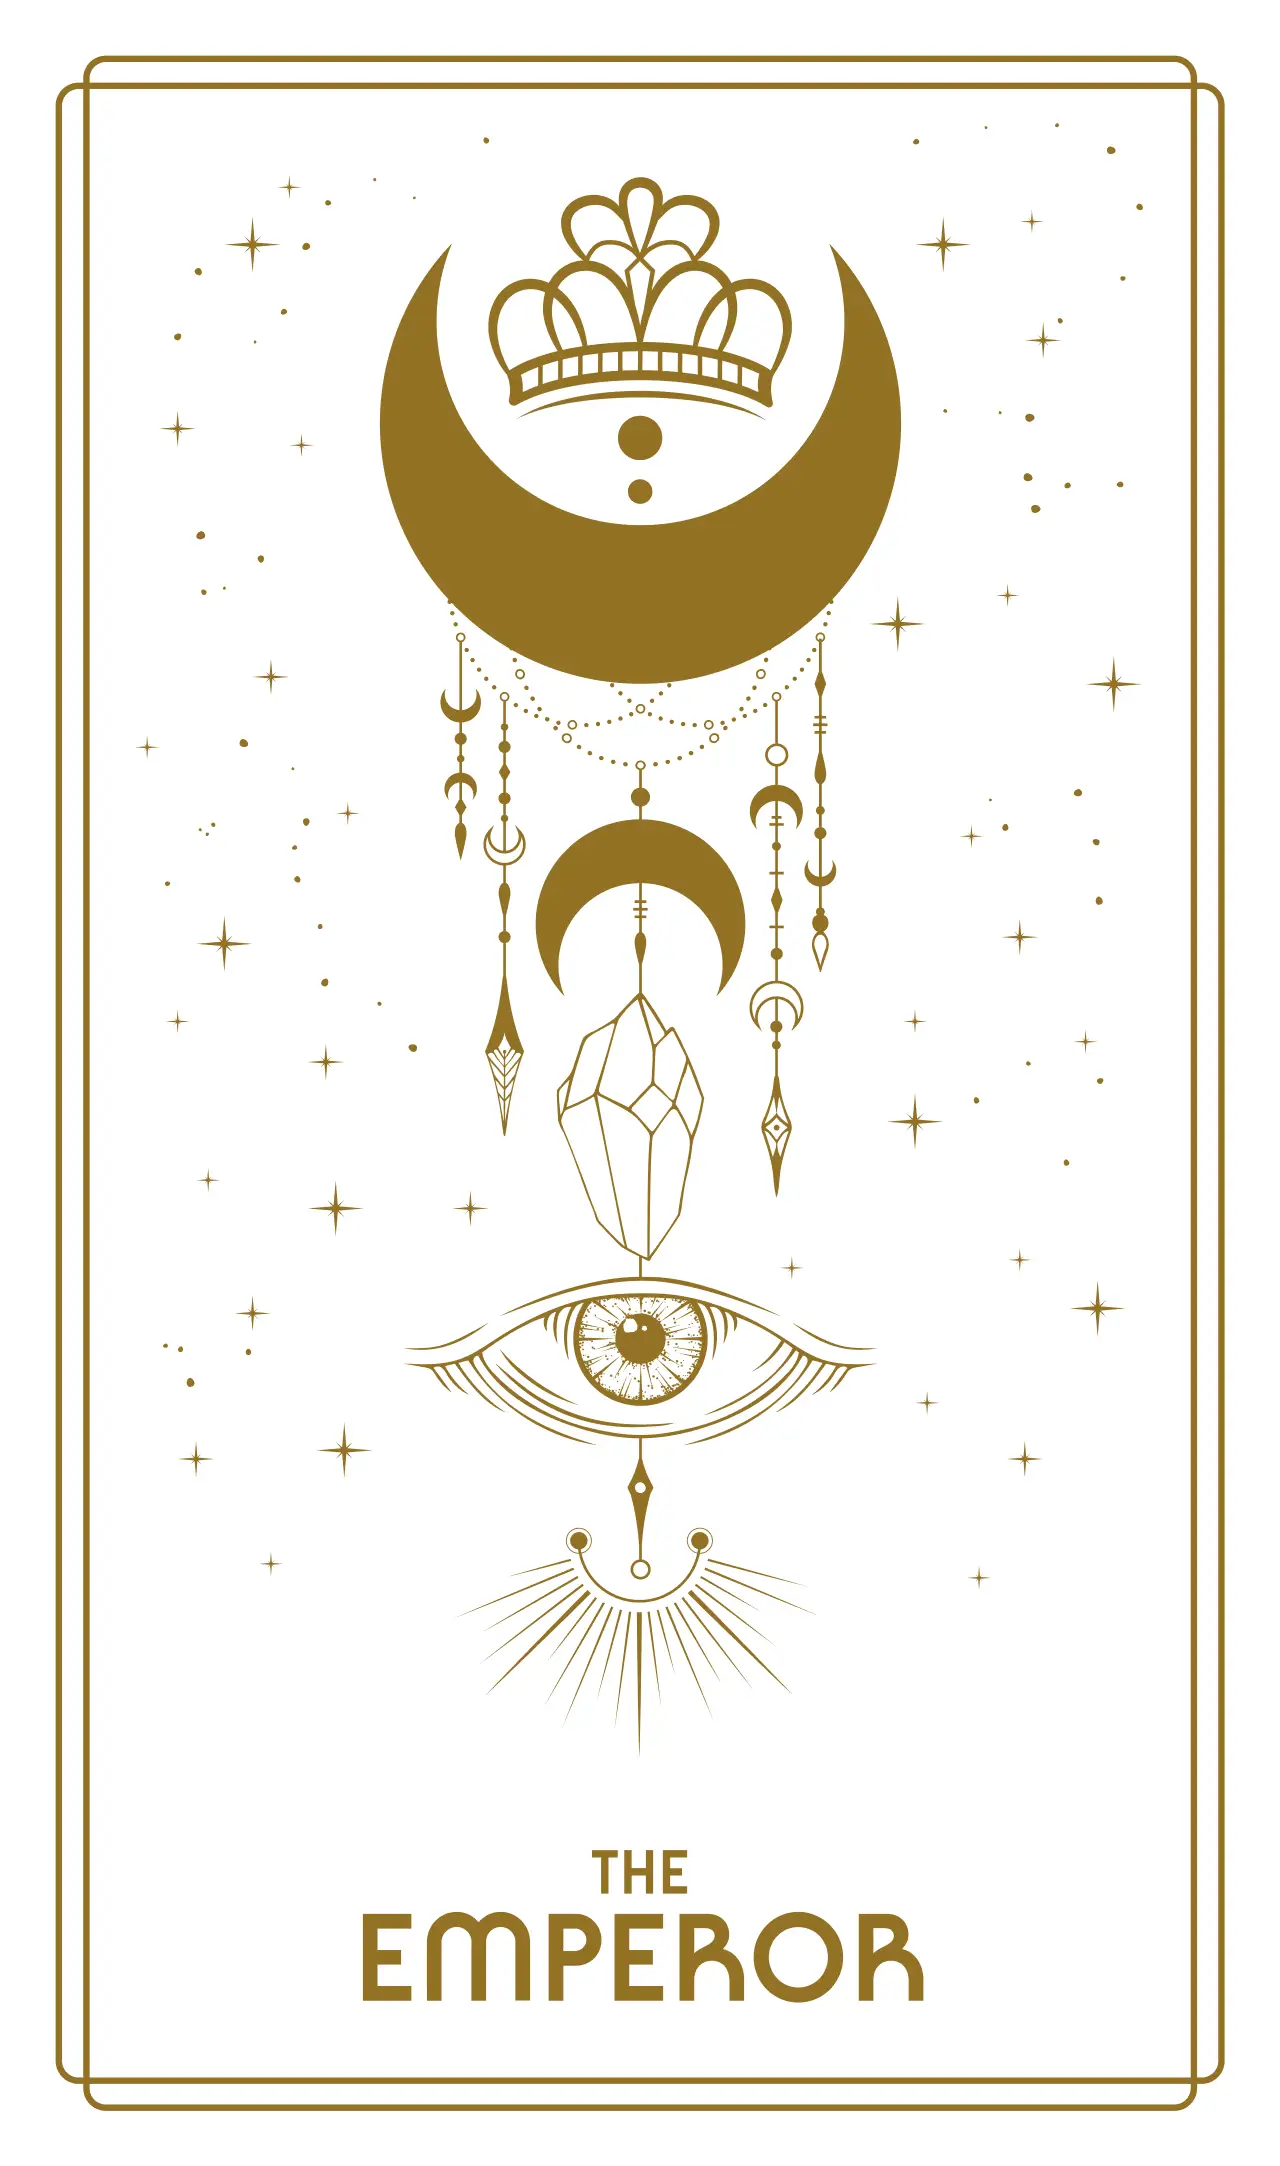 A guide to upright and reversed meaning in The Emperor tarot card